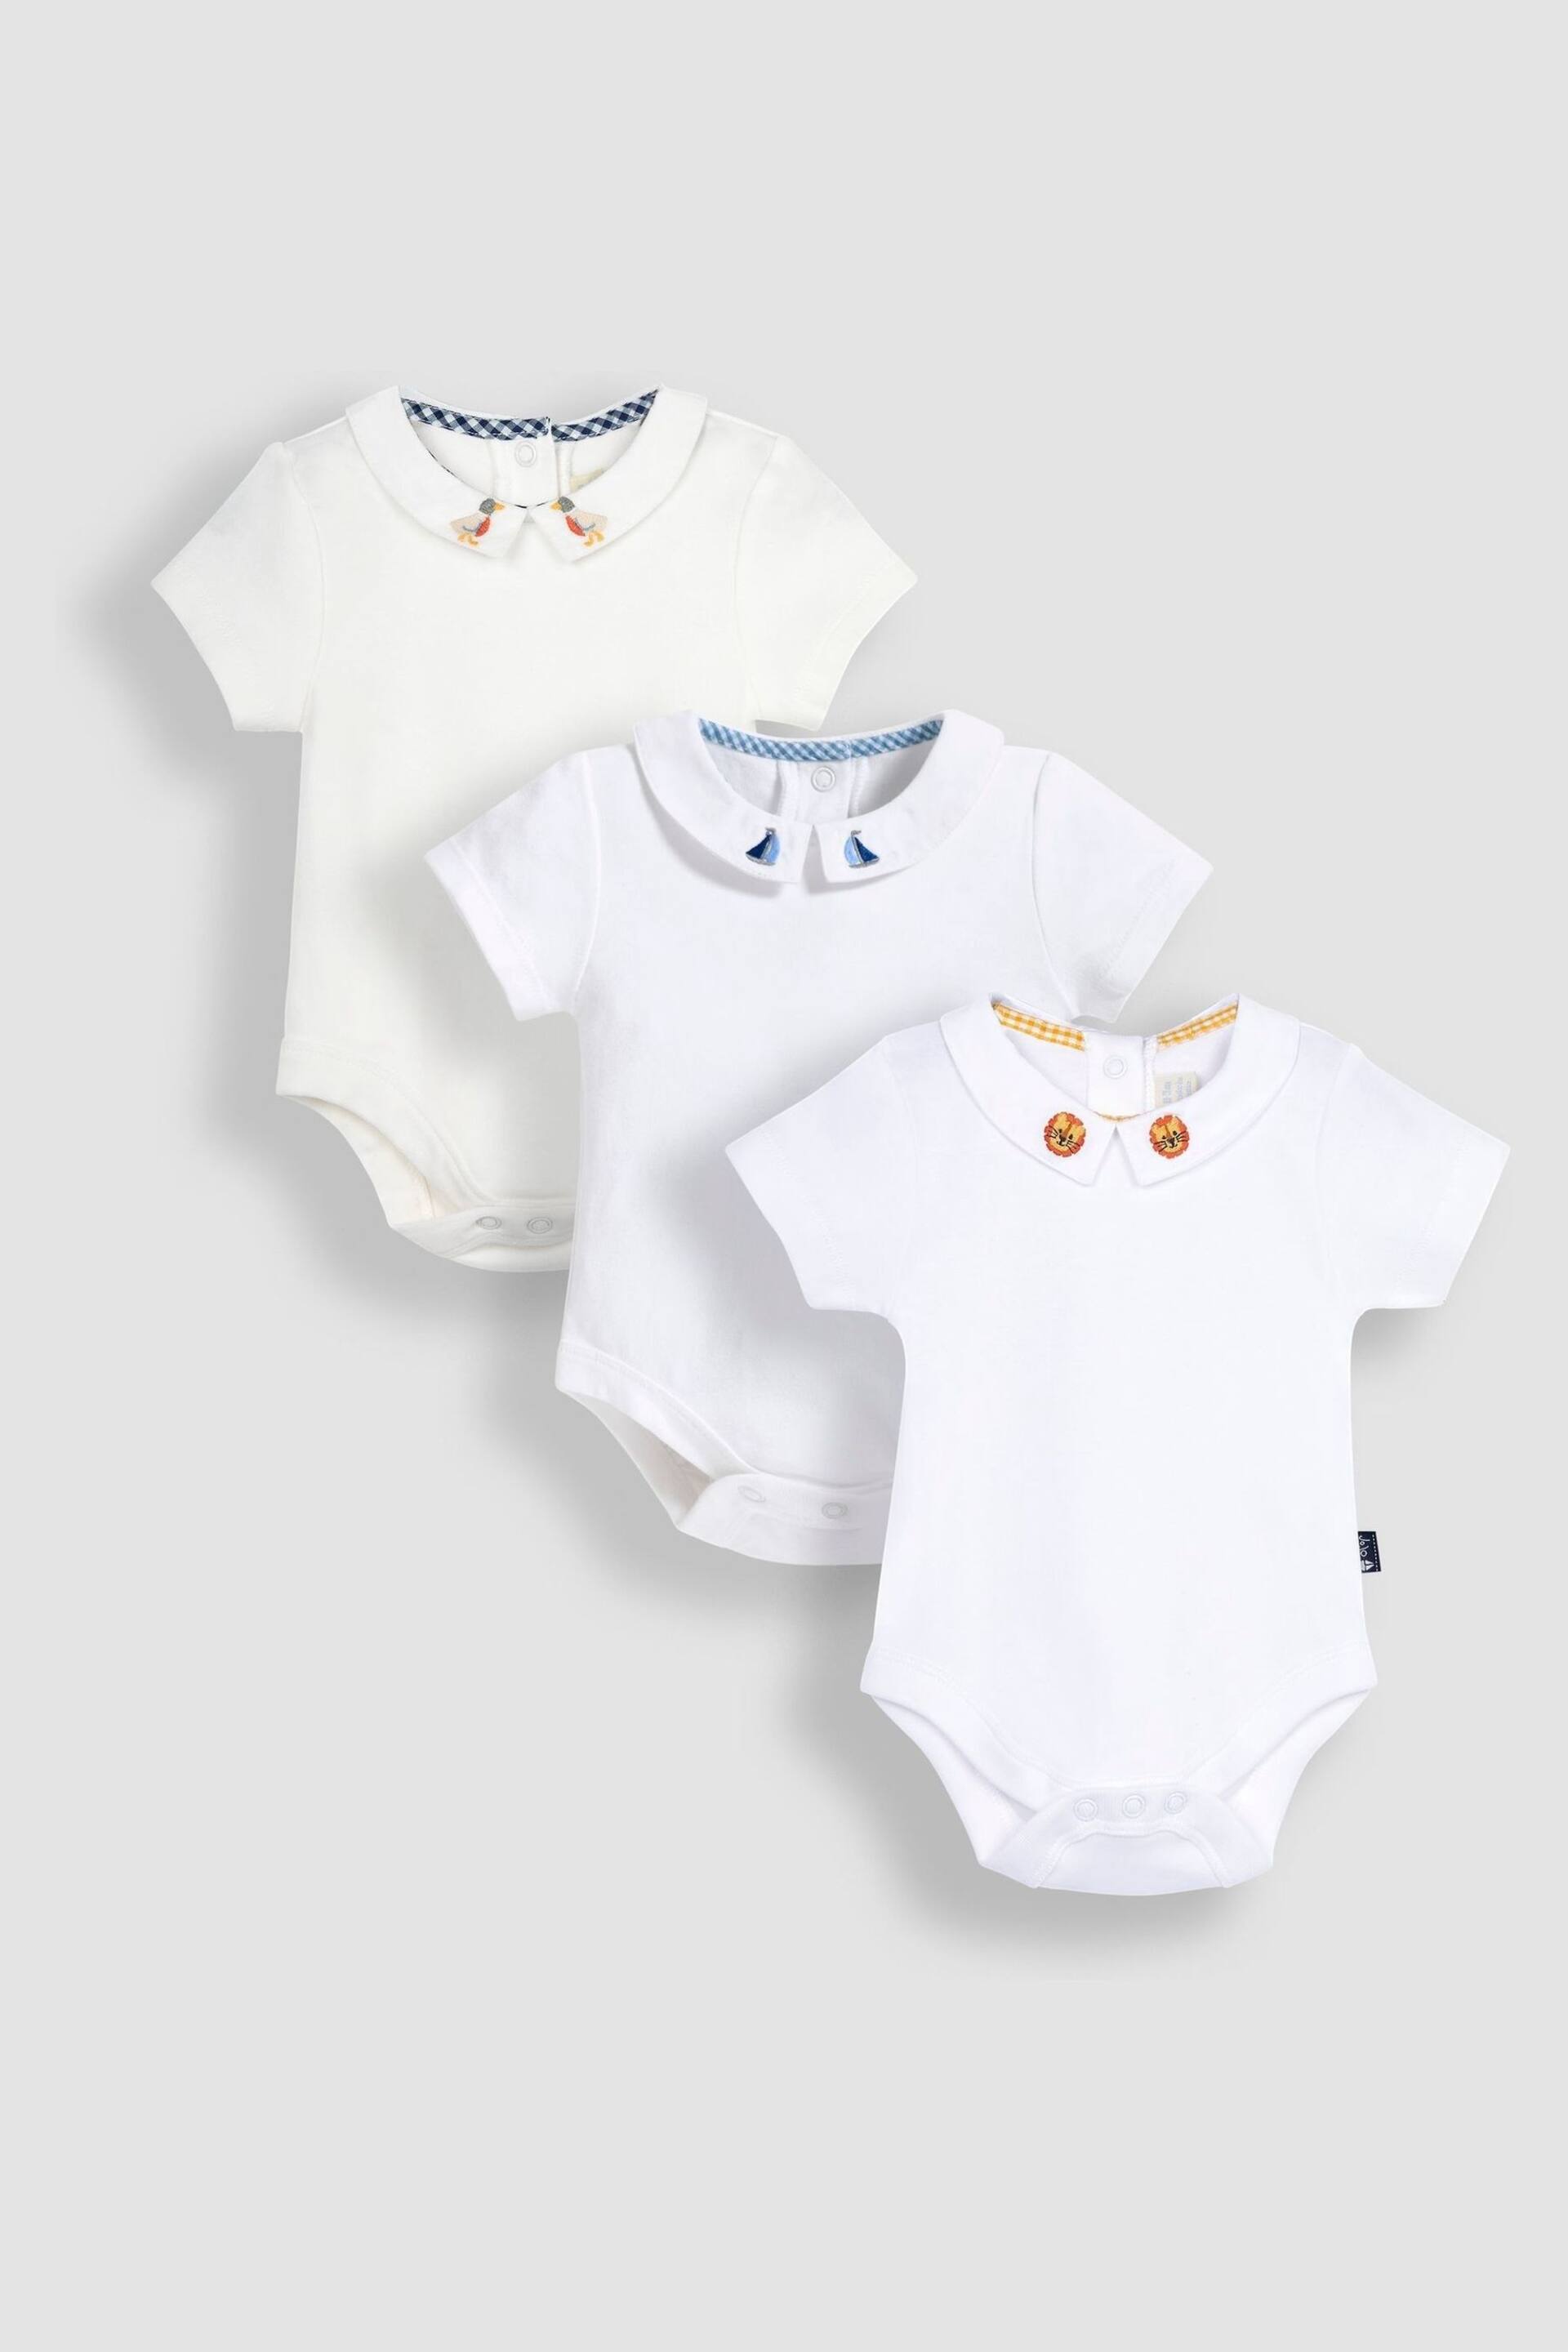 JoJo Maman Bébé White 3-Pack Embroidered Collar Bodysuits - Image 1 of 1